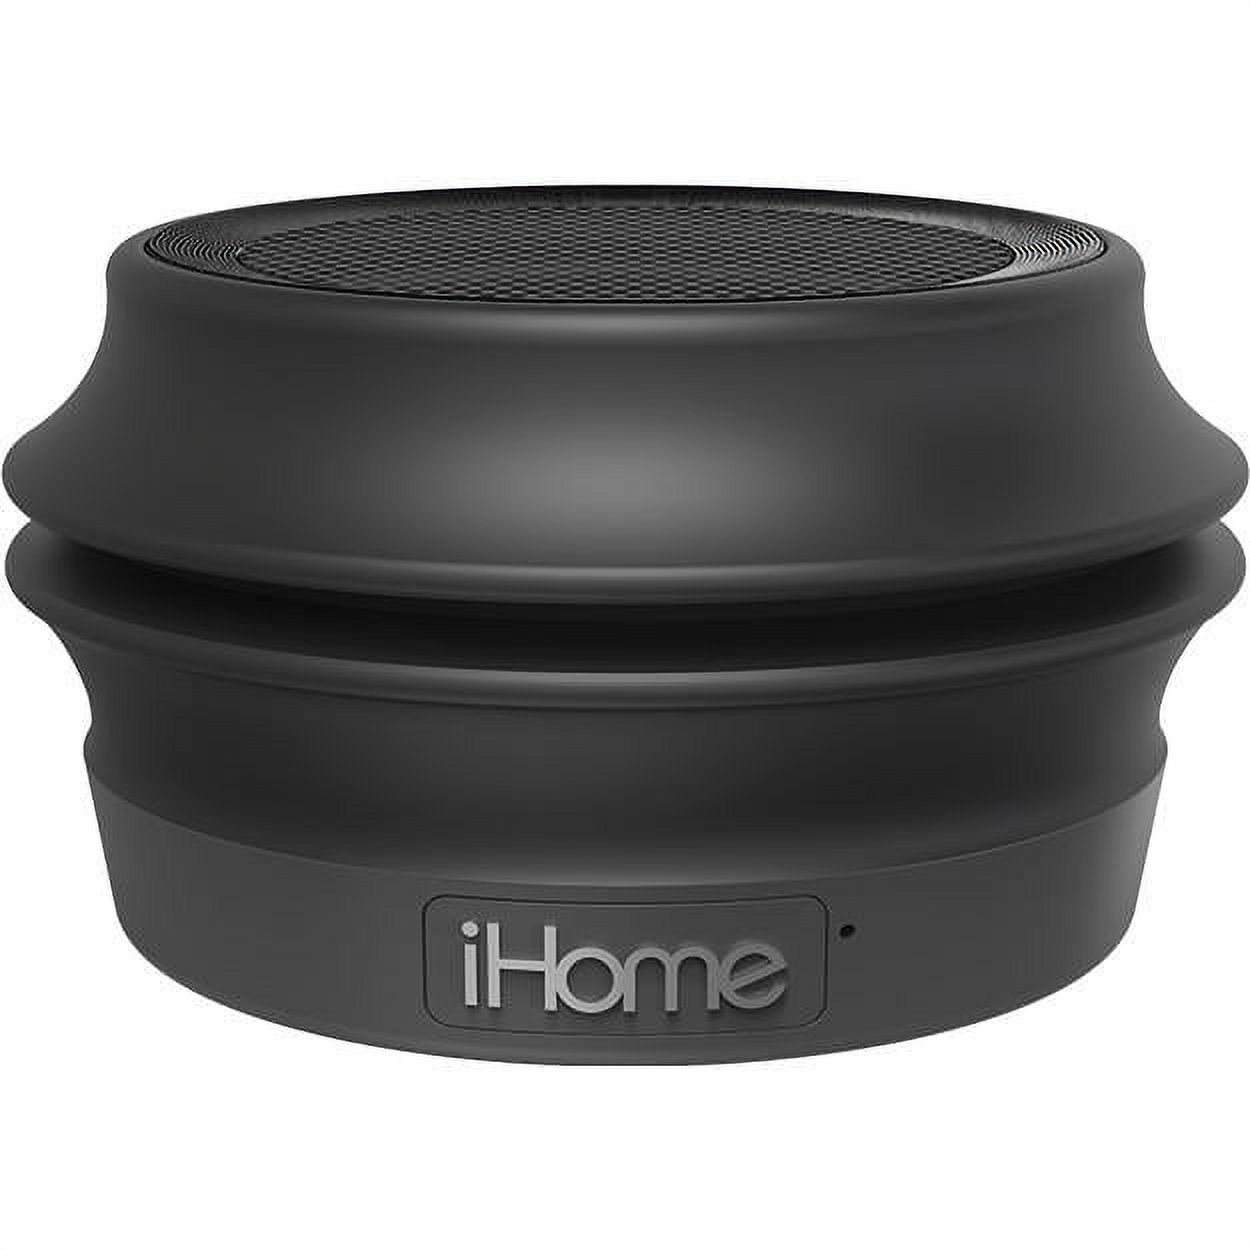 iHome Portable Bluetooth Speaker with Charges MP3 Player, Black, iBT61BC - image 1 of 2